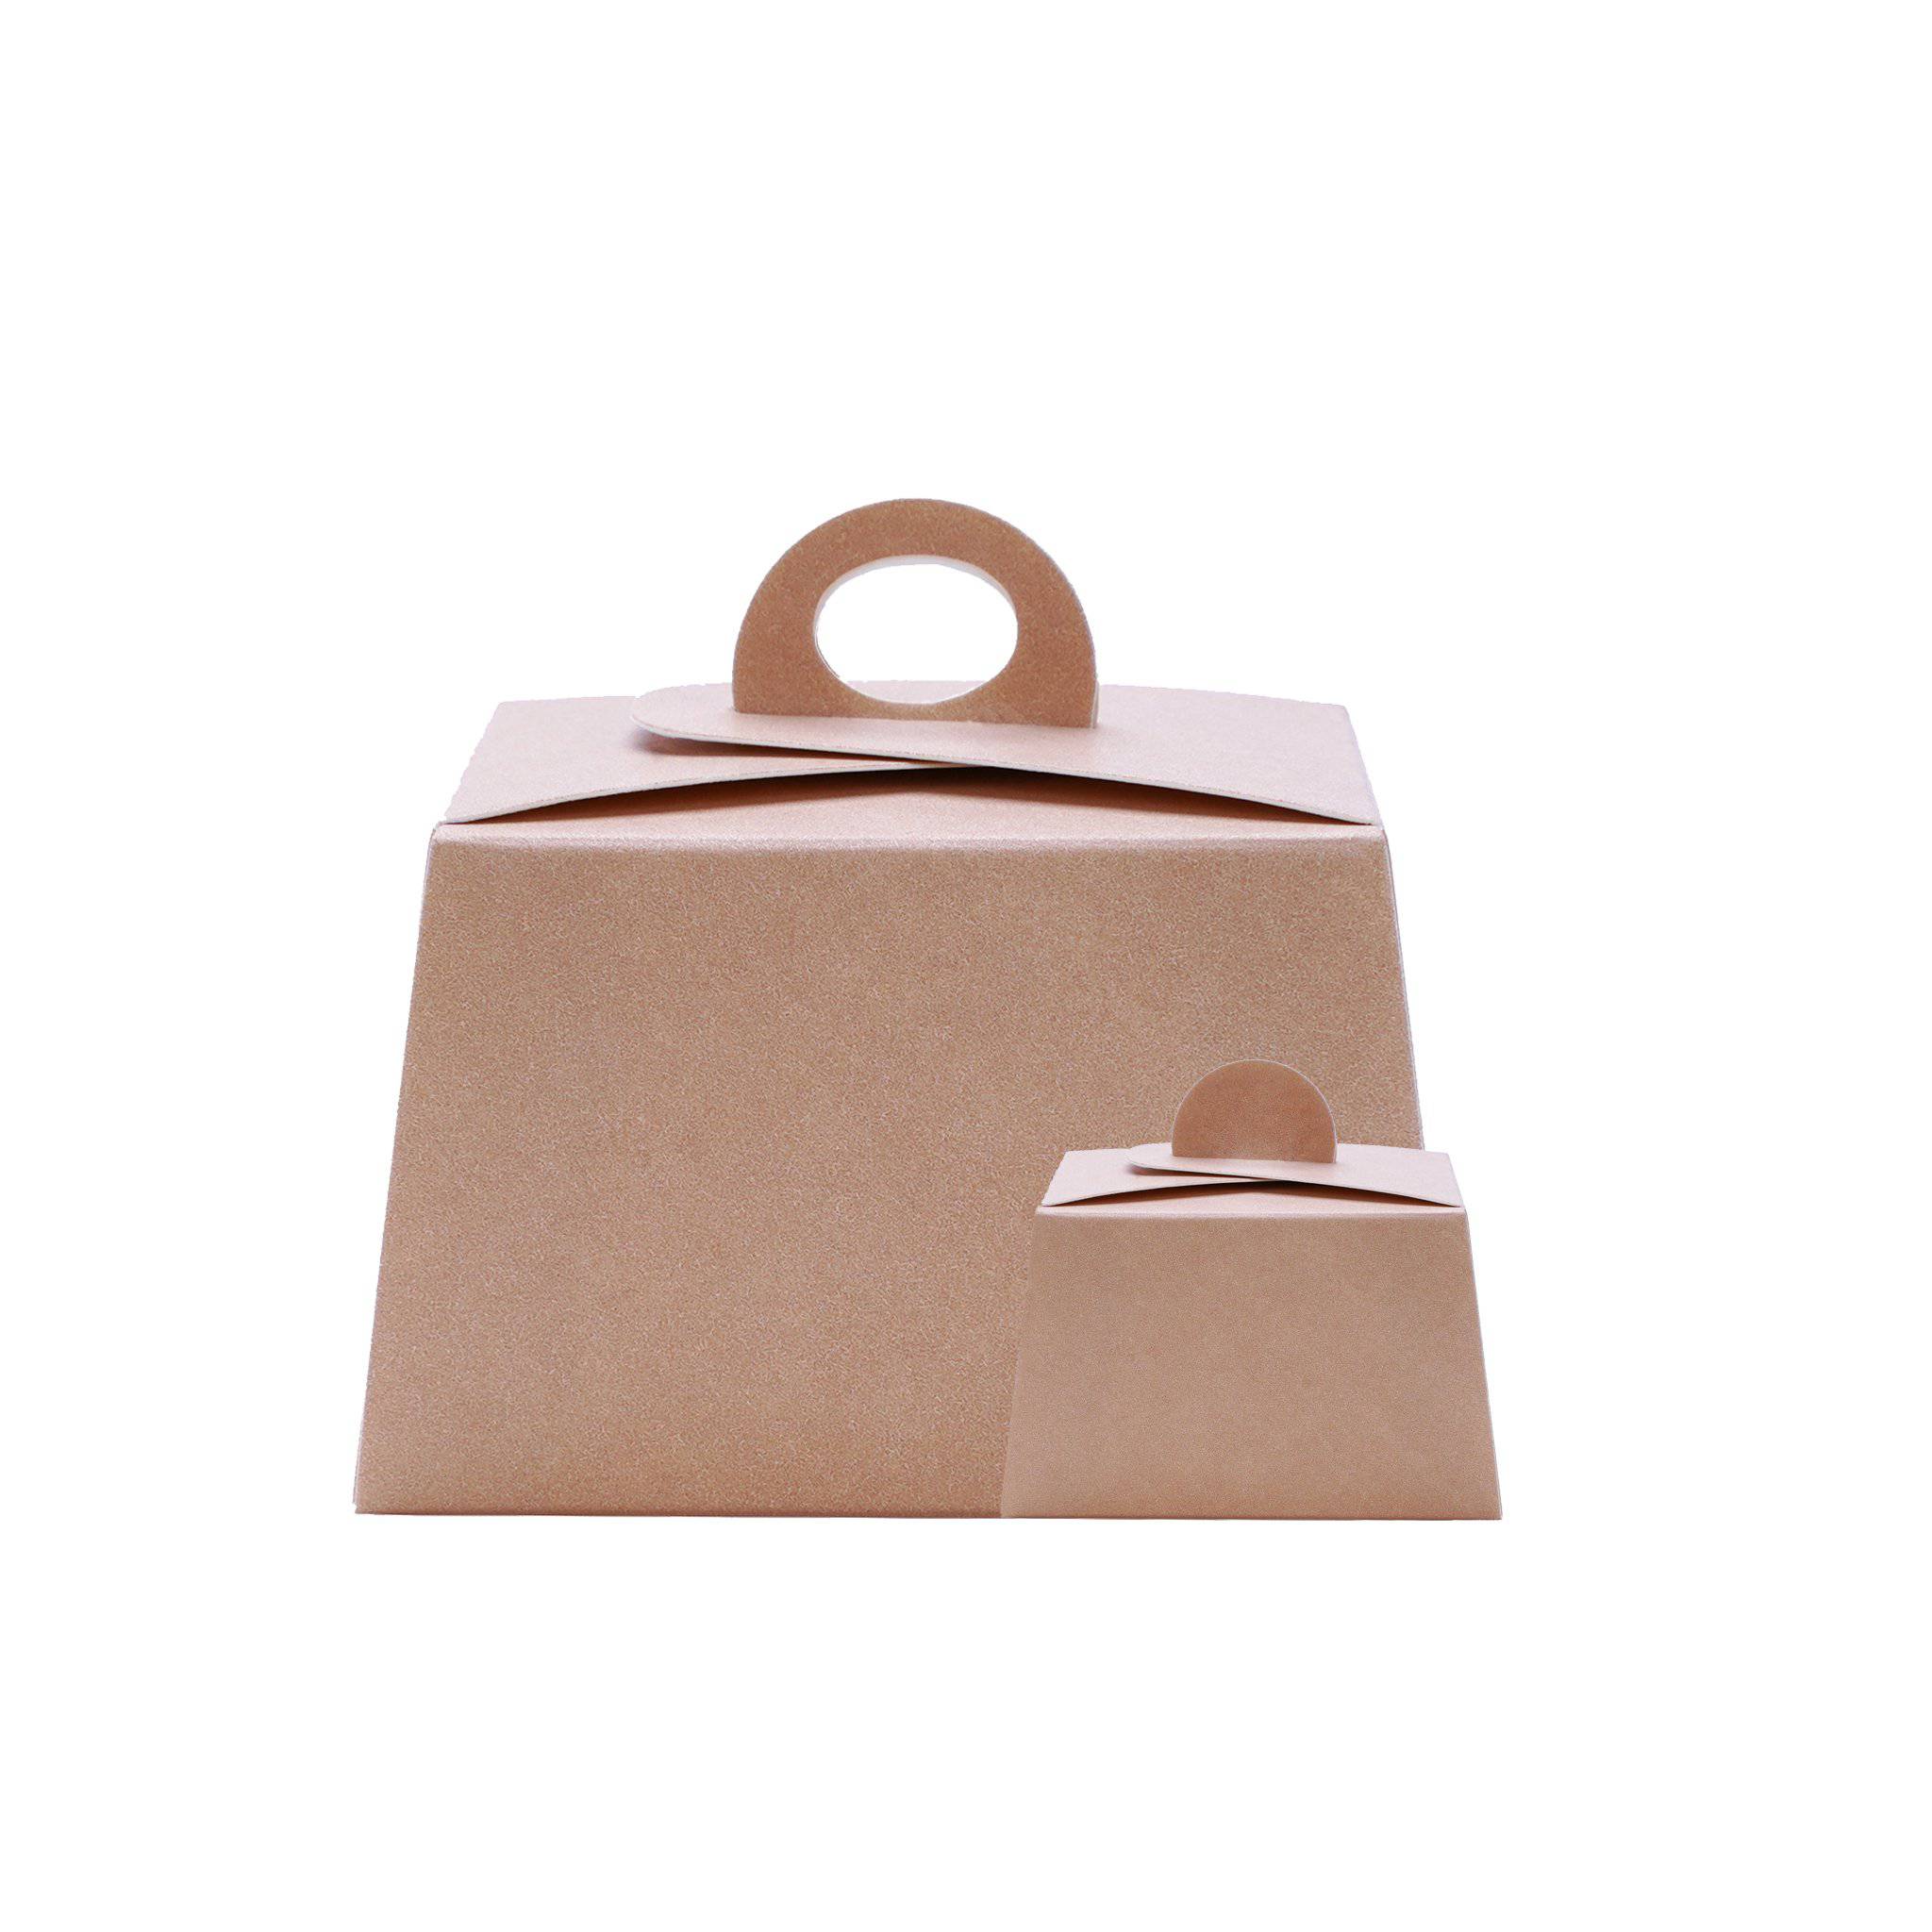 Favor Box Small Size 25 Pieces 3x4x4.8 cm - Hotpack Global